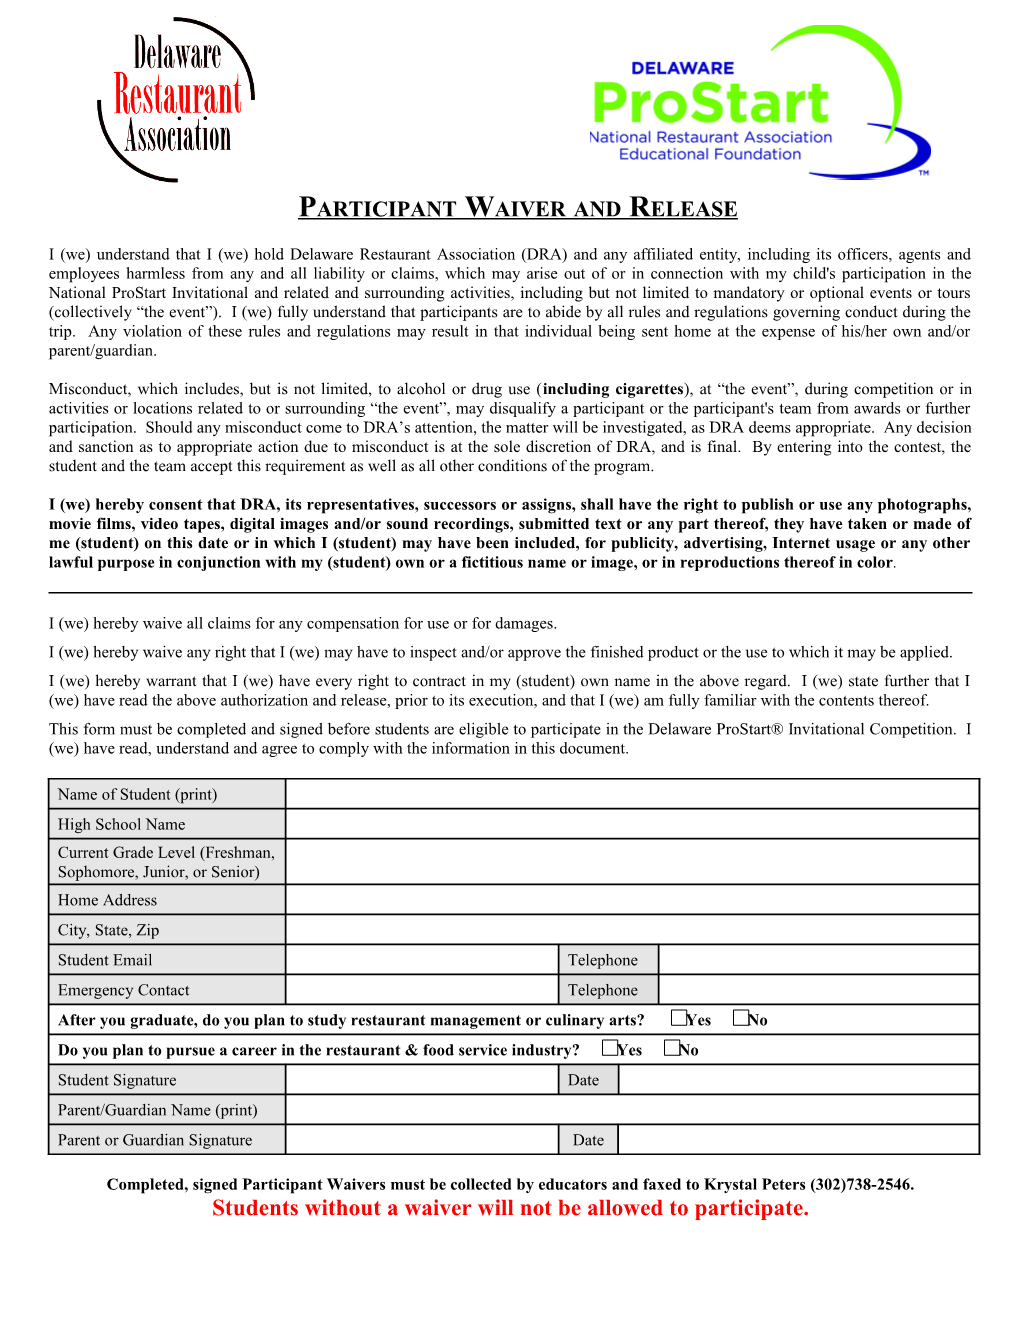 Participant Waiver and Release